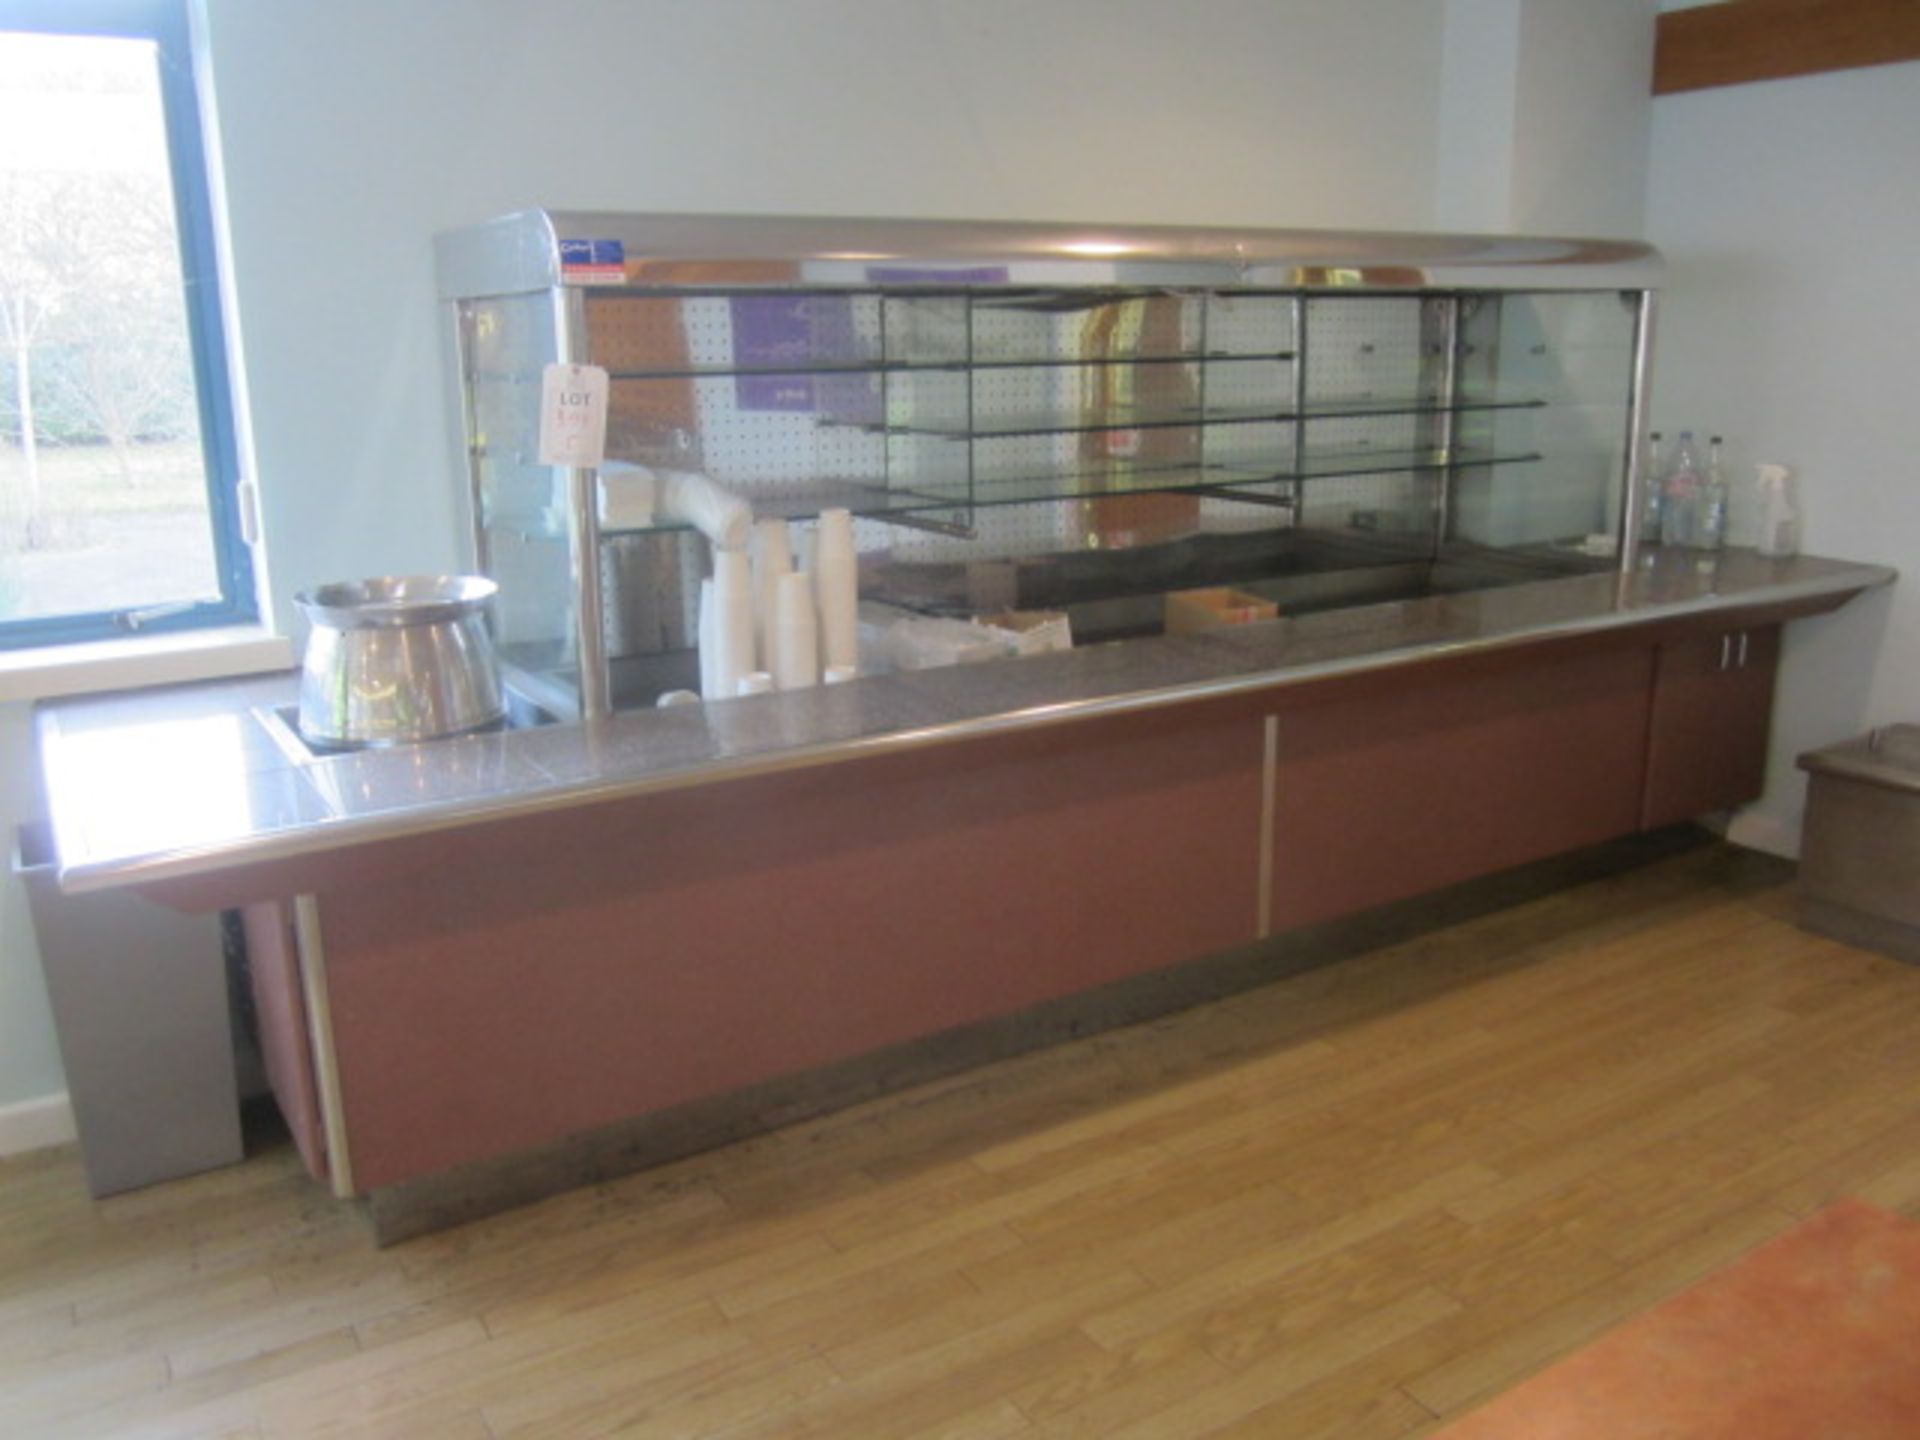 Tiled top serving counter with glass shelf chiller display, under canopy lighting, soup warmer,